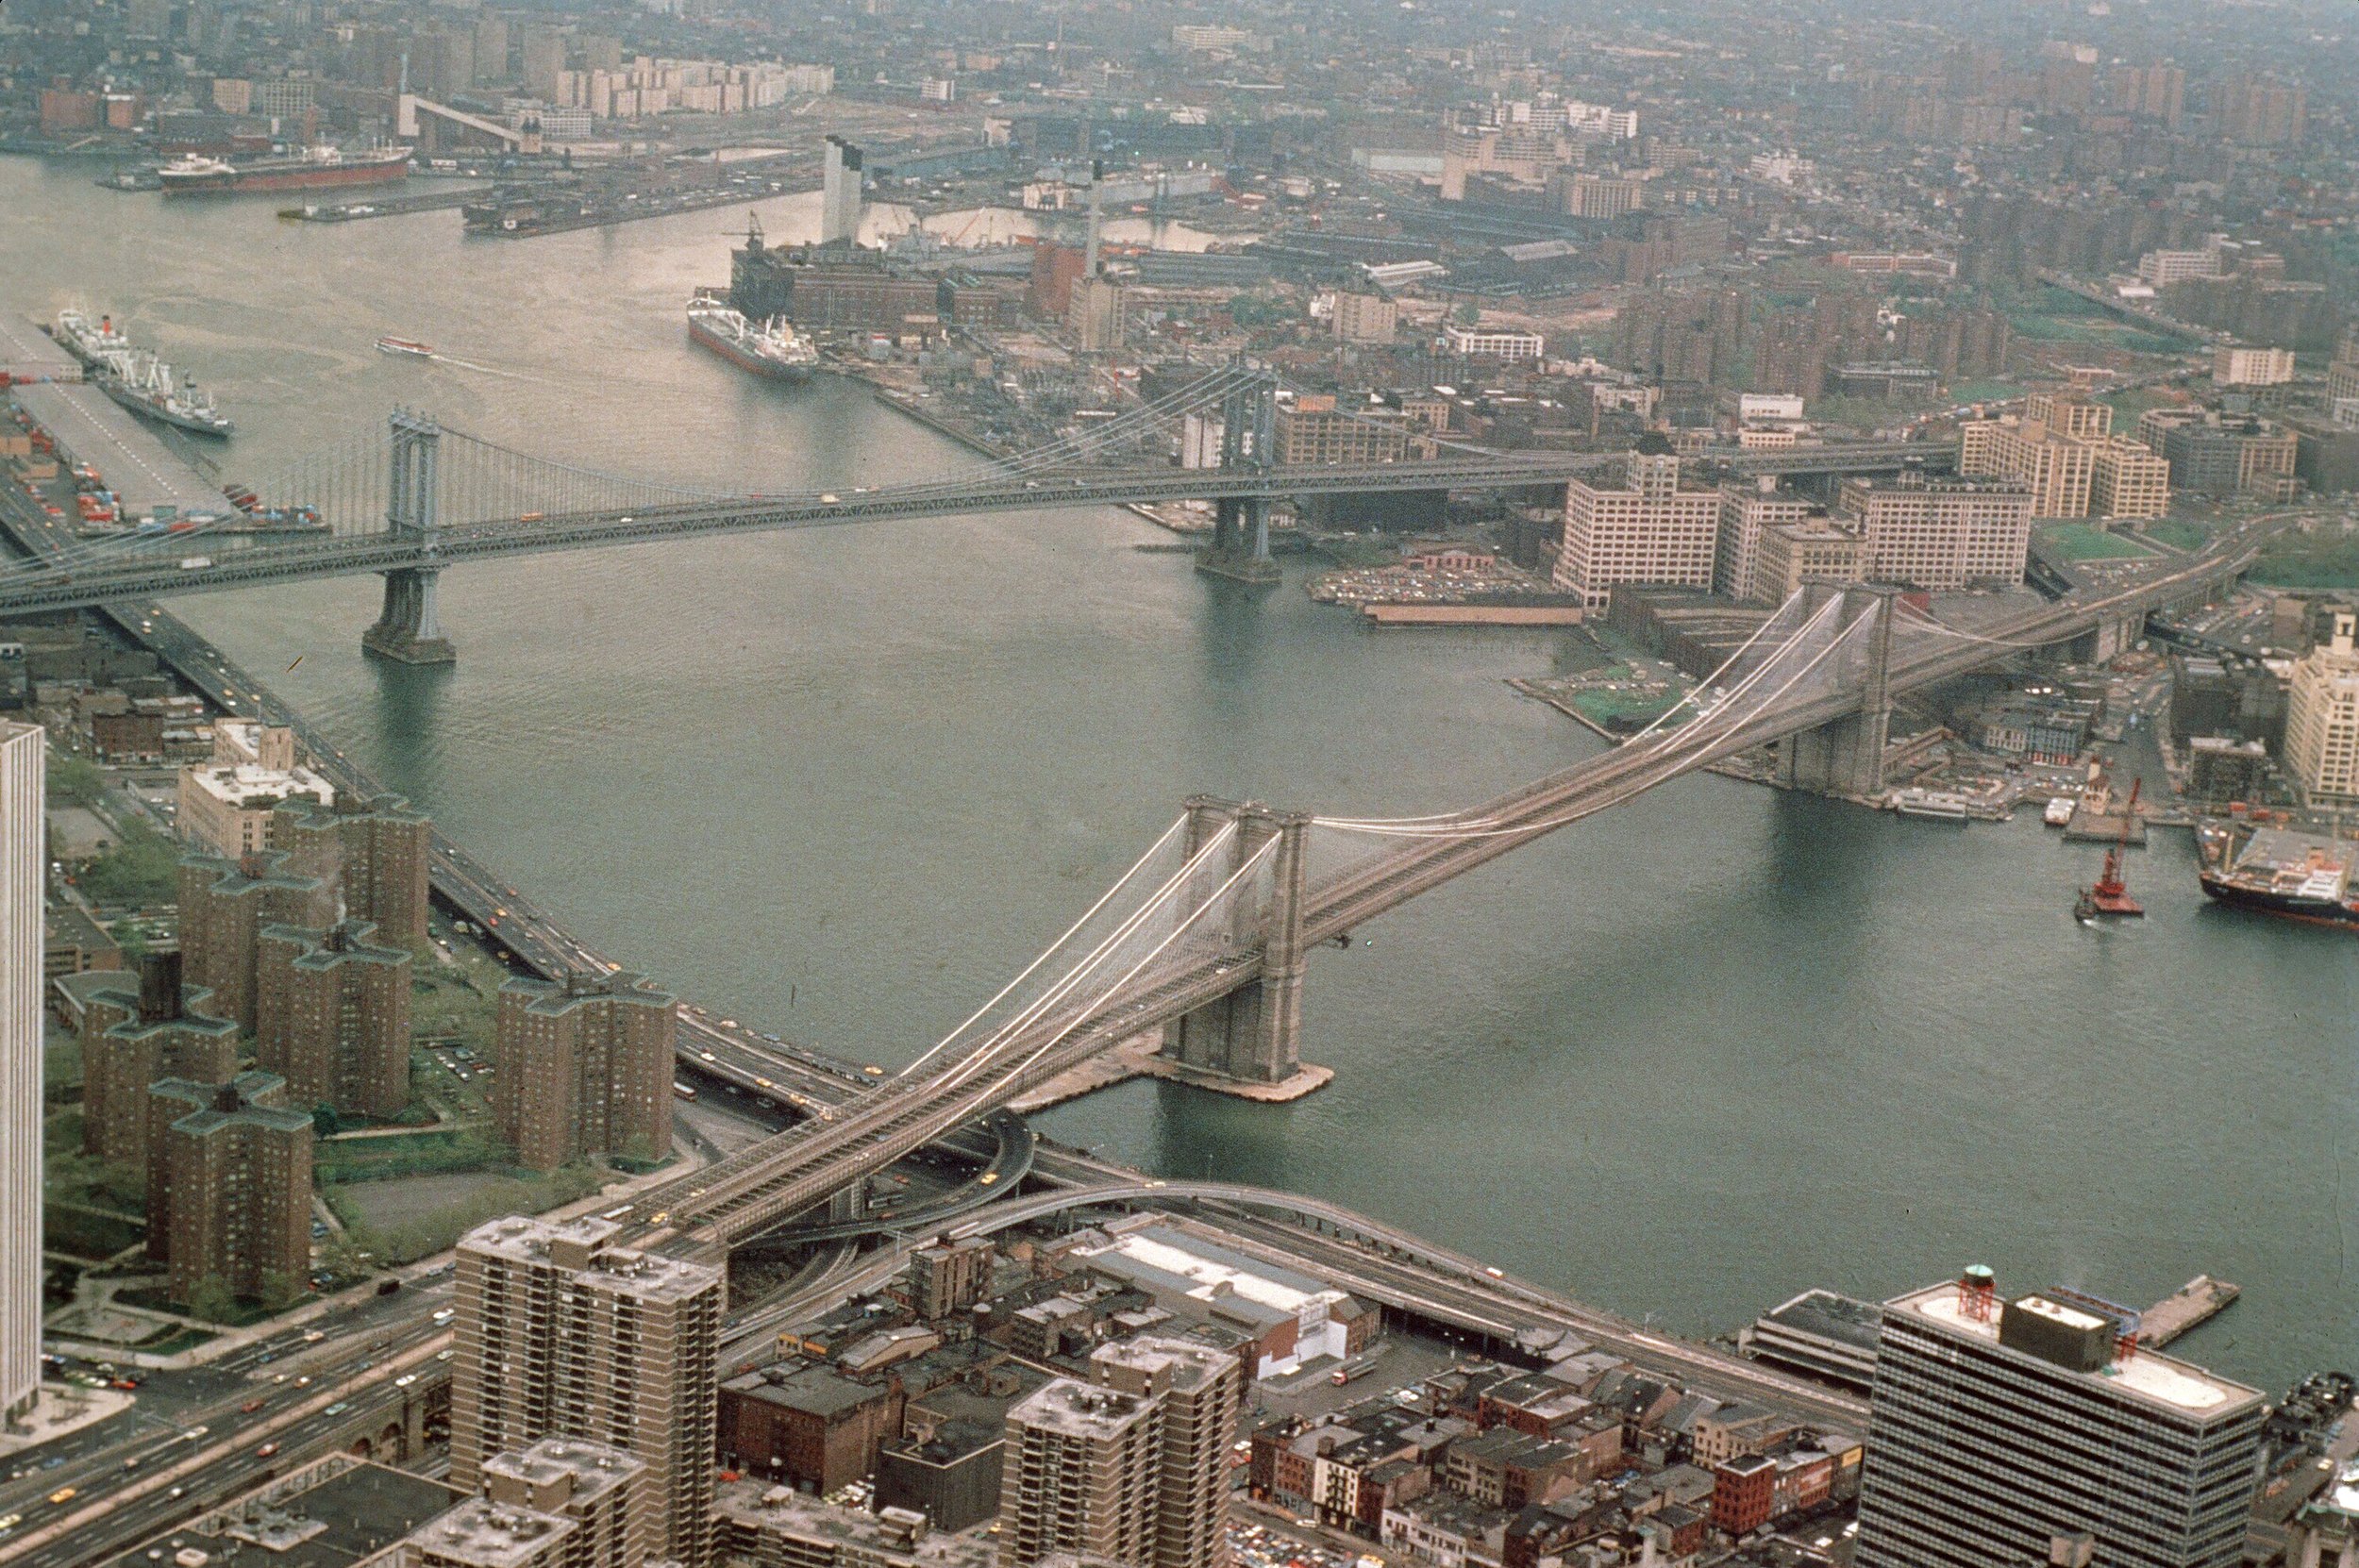  Taken from atop the Empire State Bldg, 1978.  The Manhattan Bridge is to the left, with DUMBO underneath.  The area between it &amp; the Brooklyn Bridge is the new Brooklyn Bridge Park.   You can make out the clock tower building between the bridges